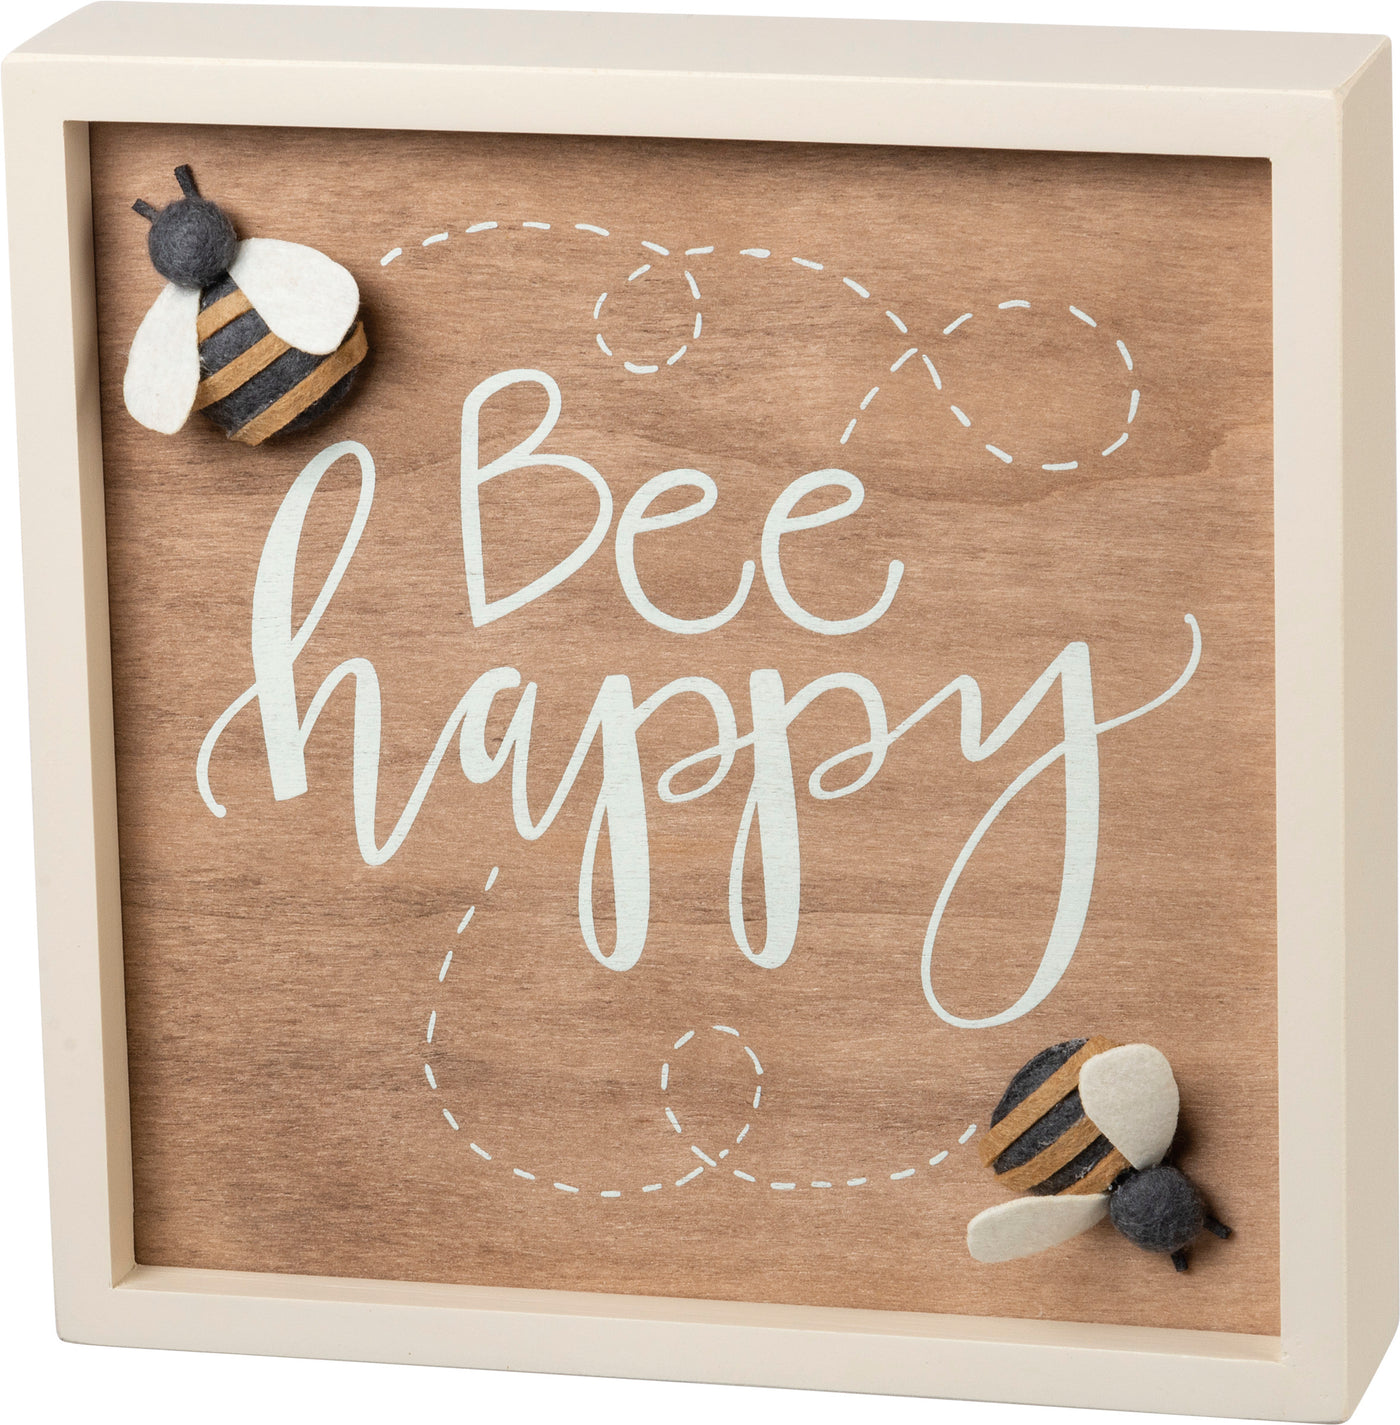 Bee Happy Buzzing Bees Inset Box Sign